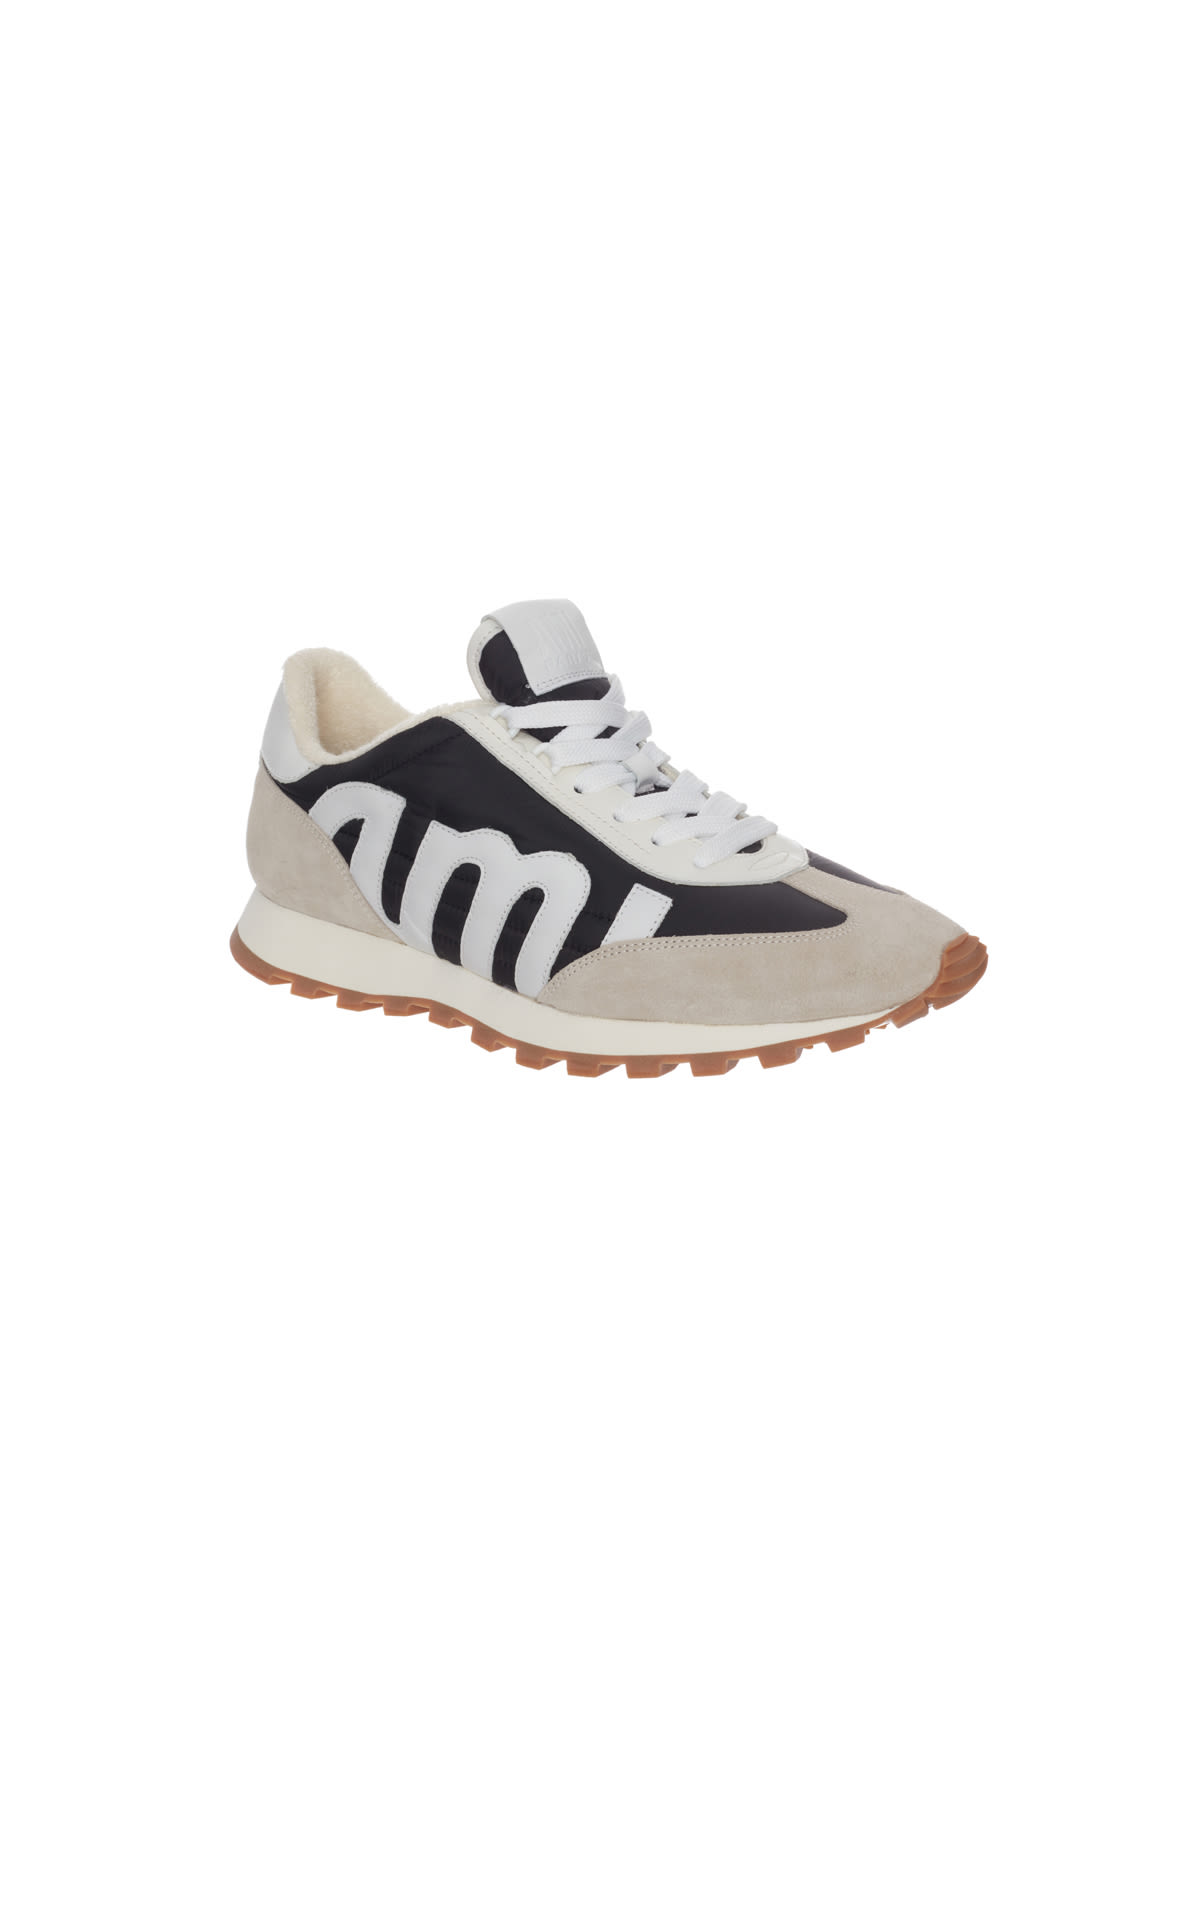 Ami Paris running sneakers from Bicester Village